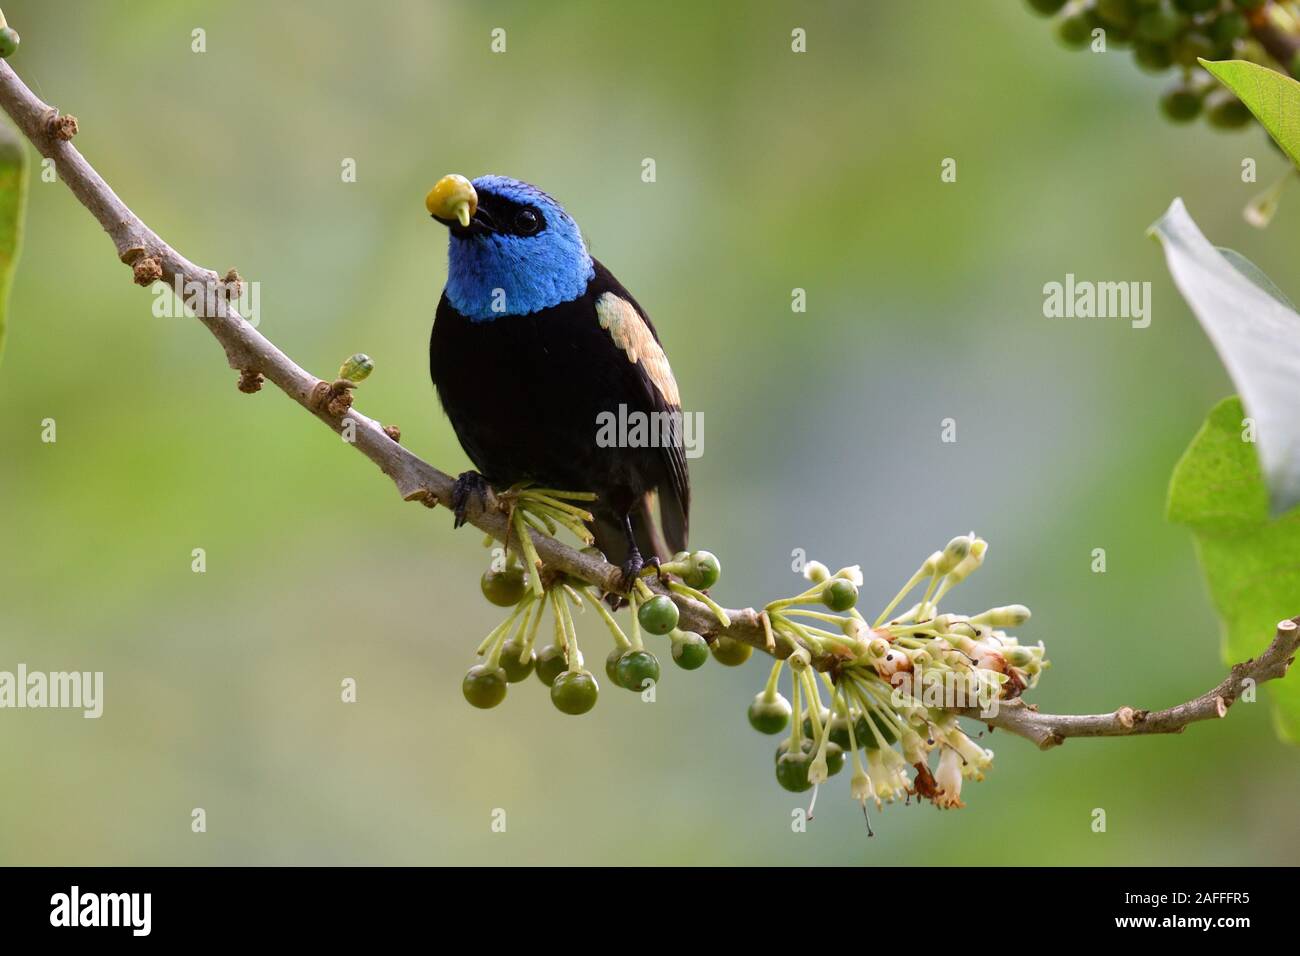 Blue-necked Tanager eat some berries in Peruvian Rainforest Stock Photo